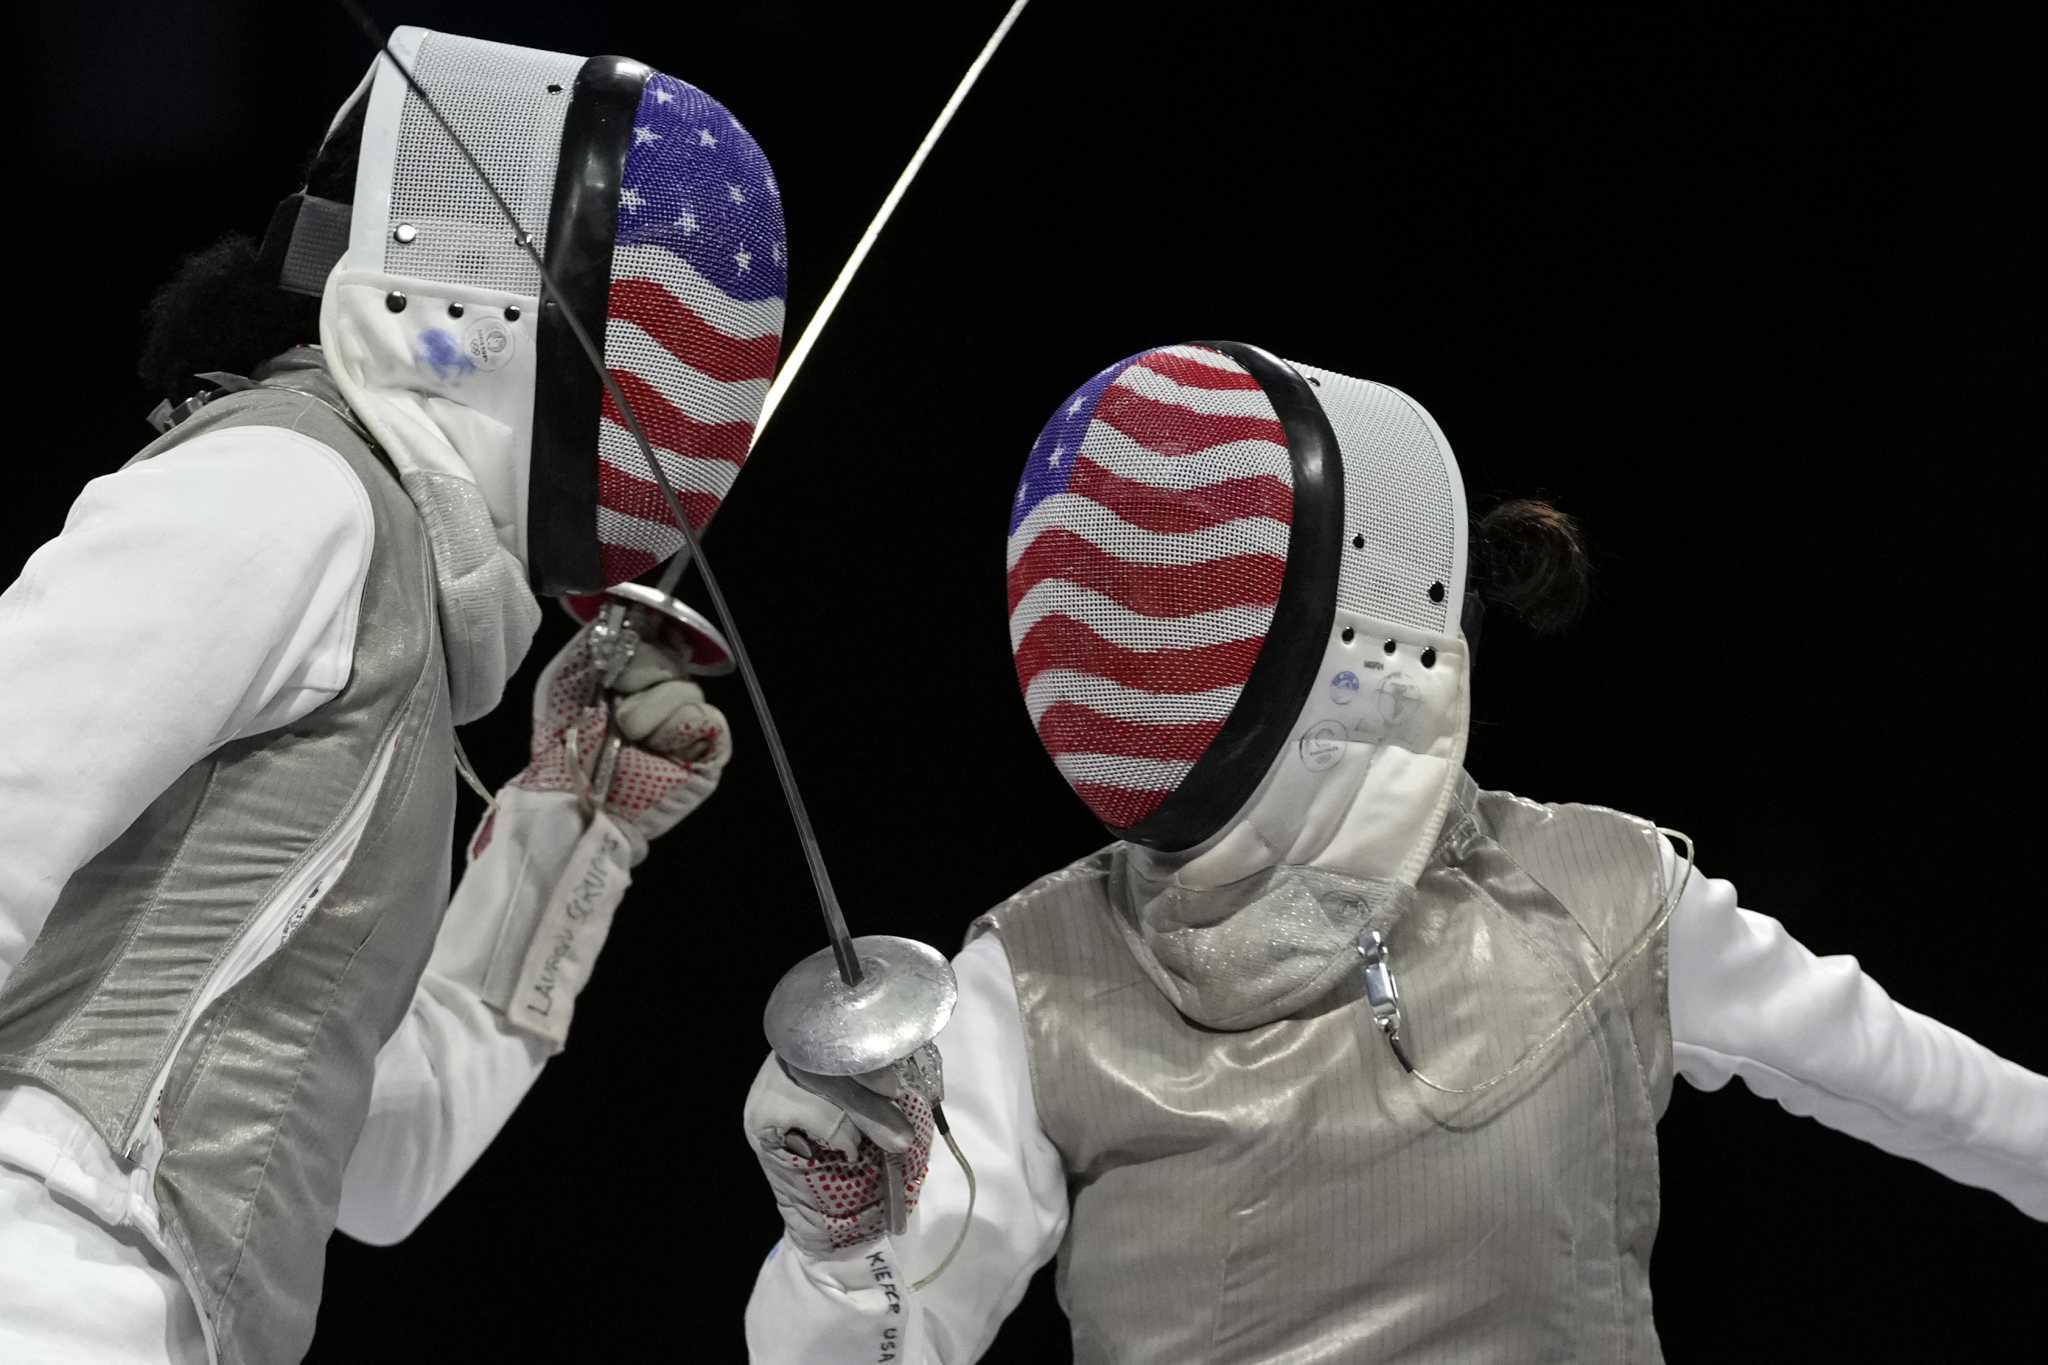 Kiefer earns 2nd Olympic gold in women's foil fencing with a victory over American teammate Scruggs